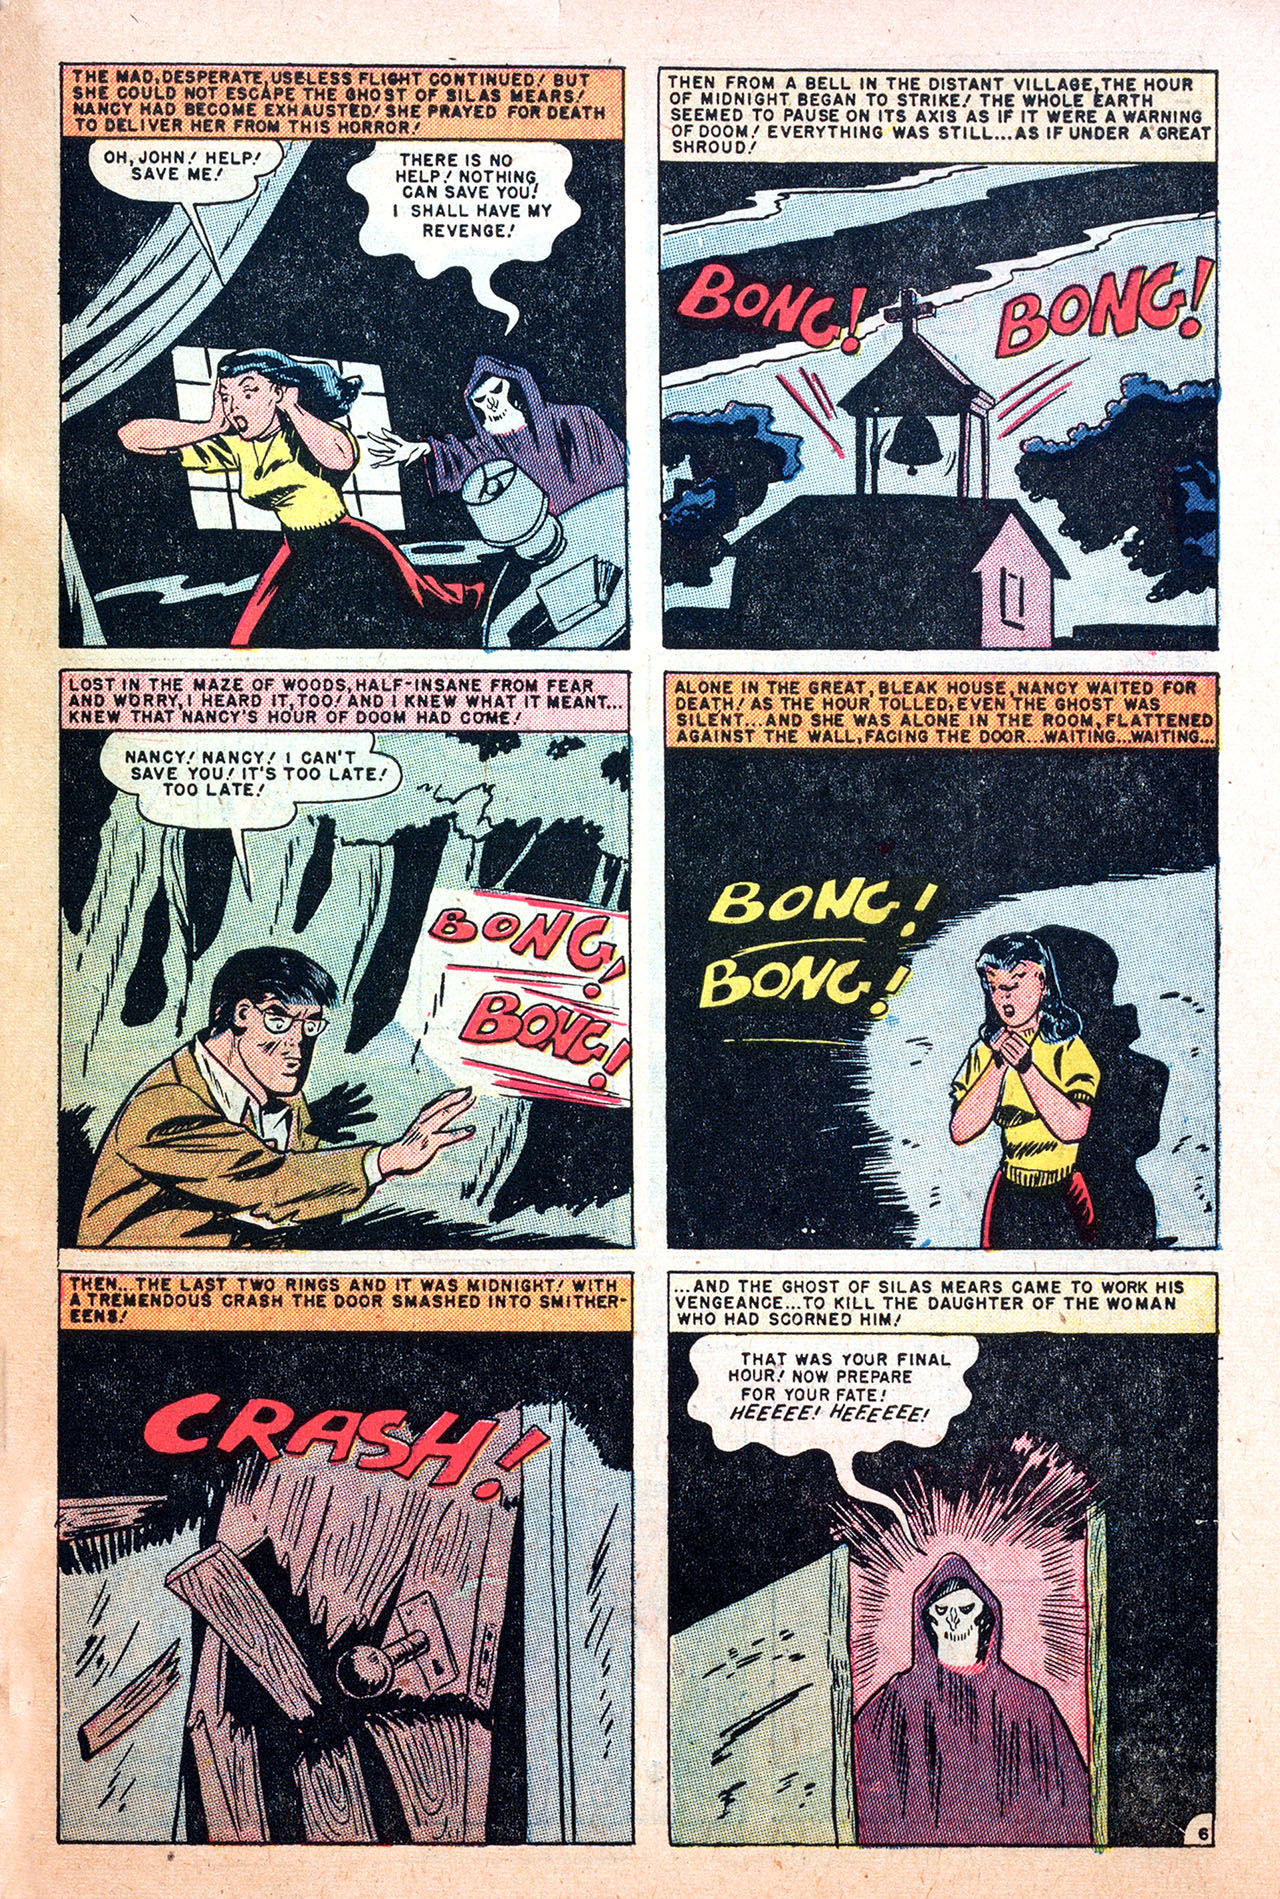 Marvel Tales (1949) 94 Page 30